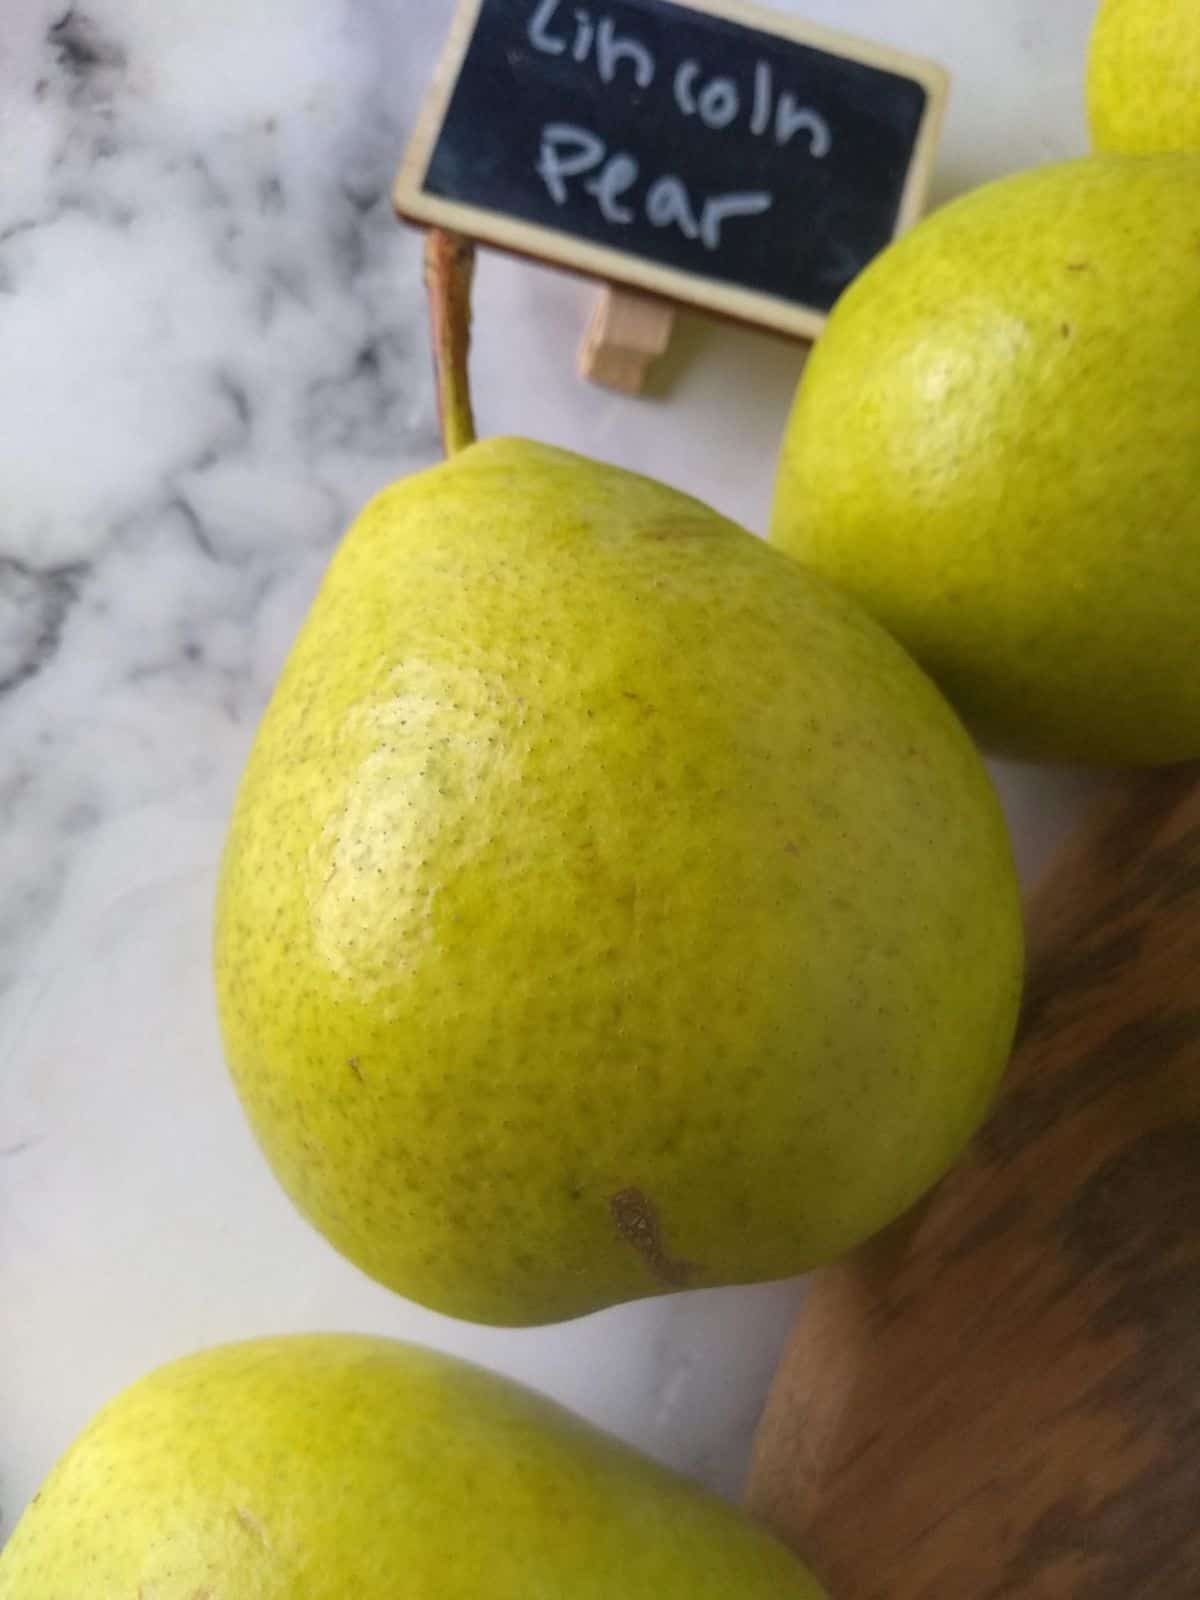 Lincoln pears sitting on a white surface next to a cutting board with a  small chalkboard sign that say what variety they are.